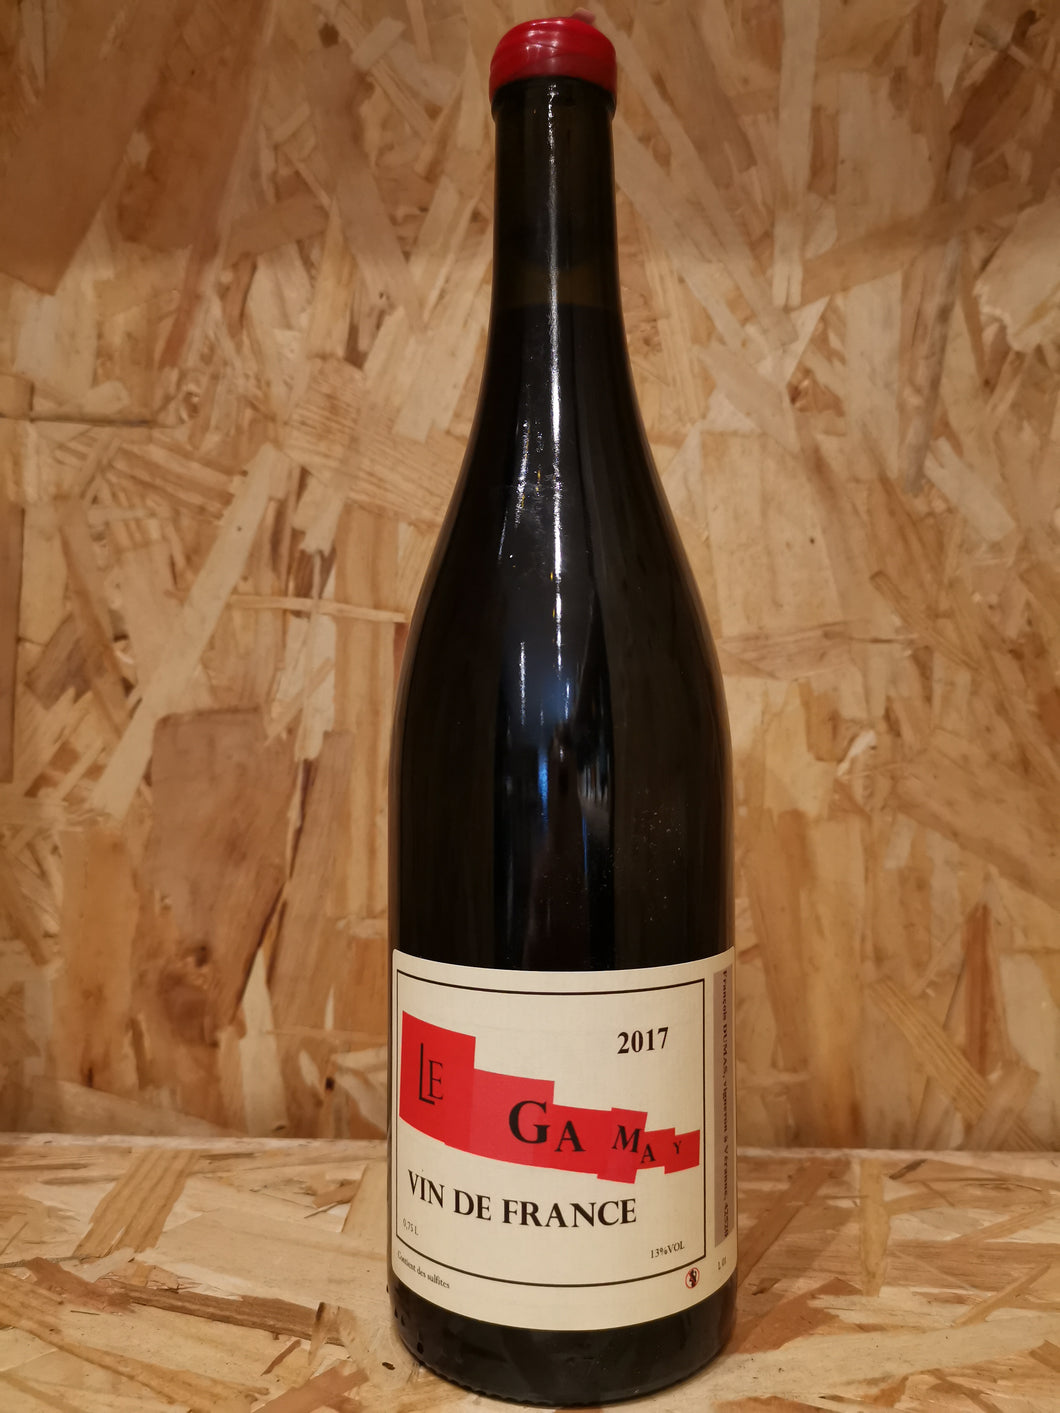 Le Gamay 2017 75 cL